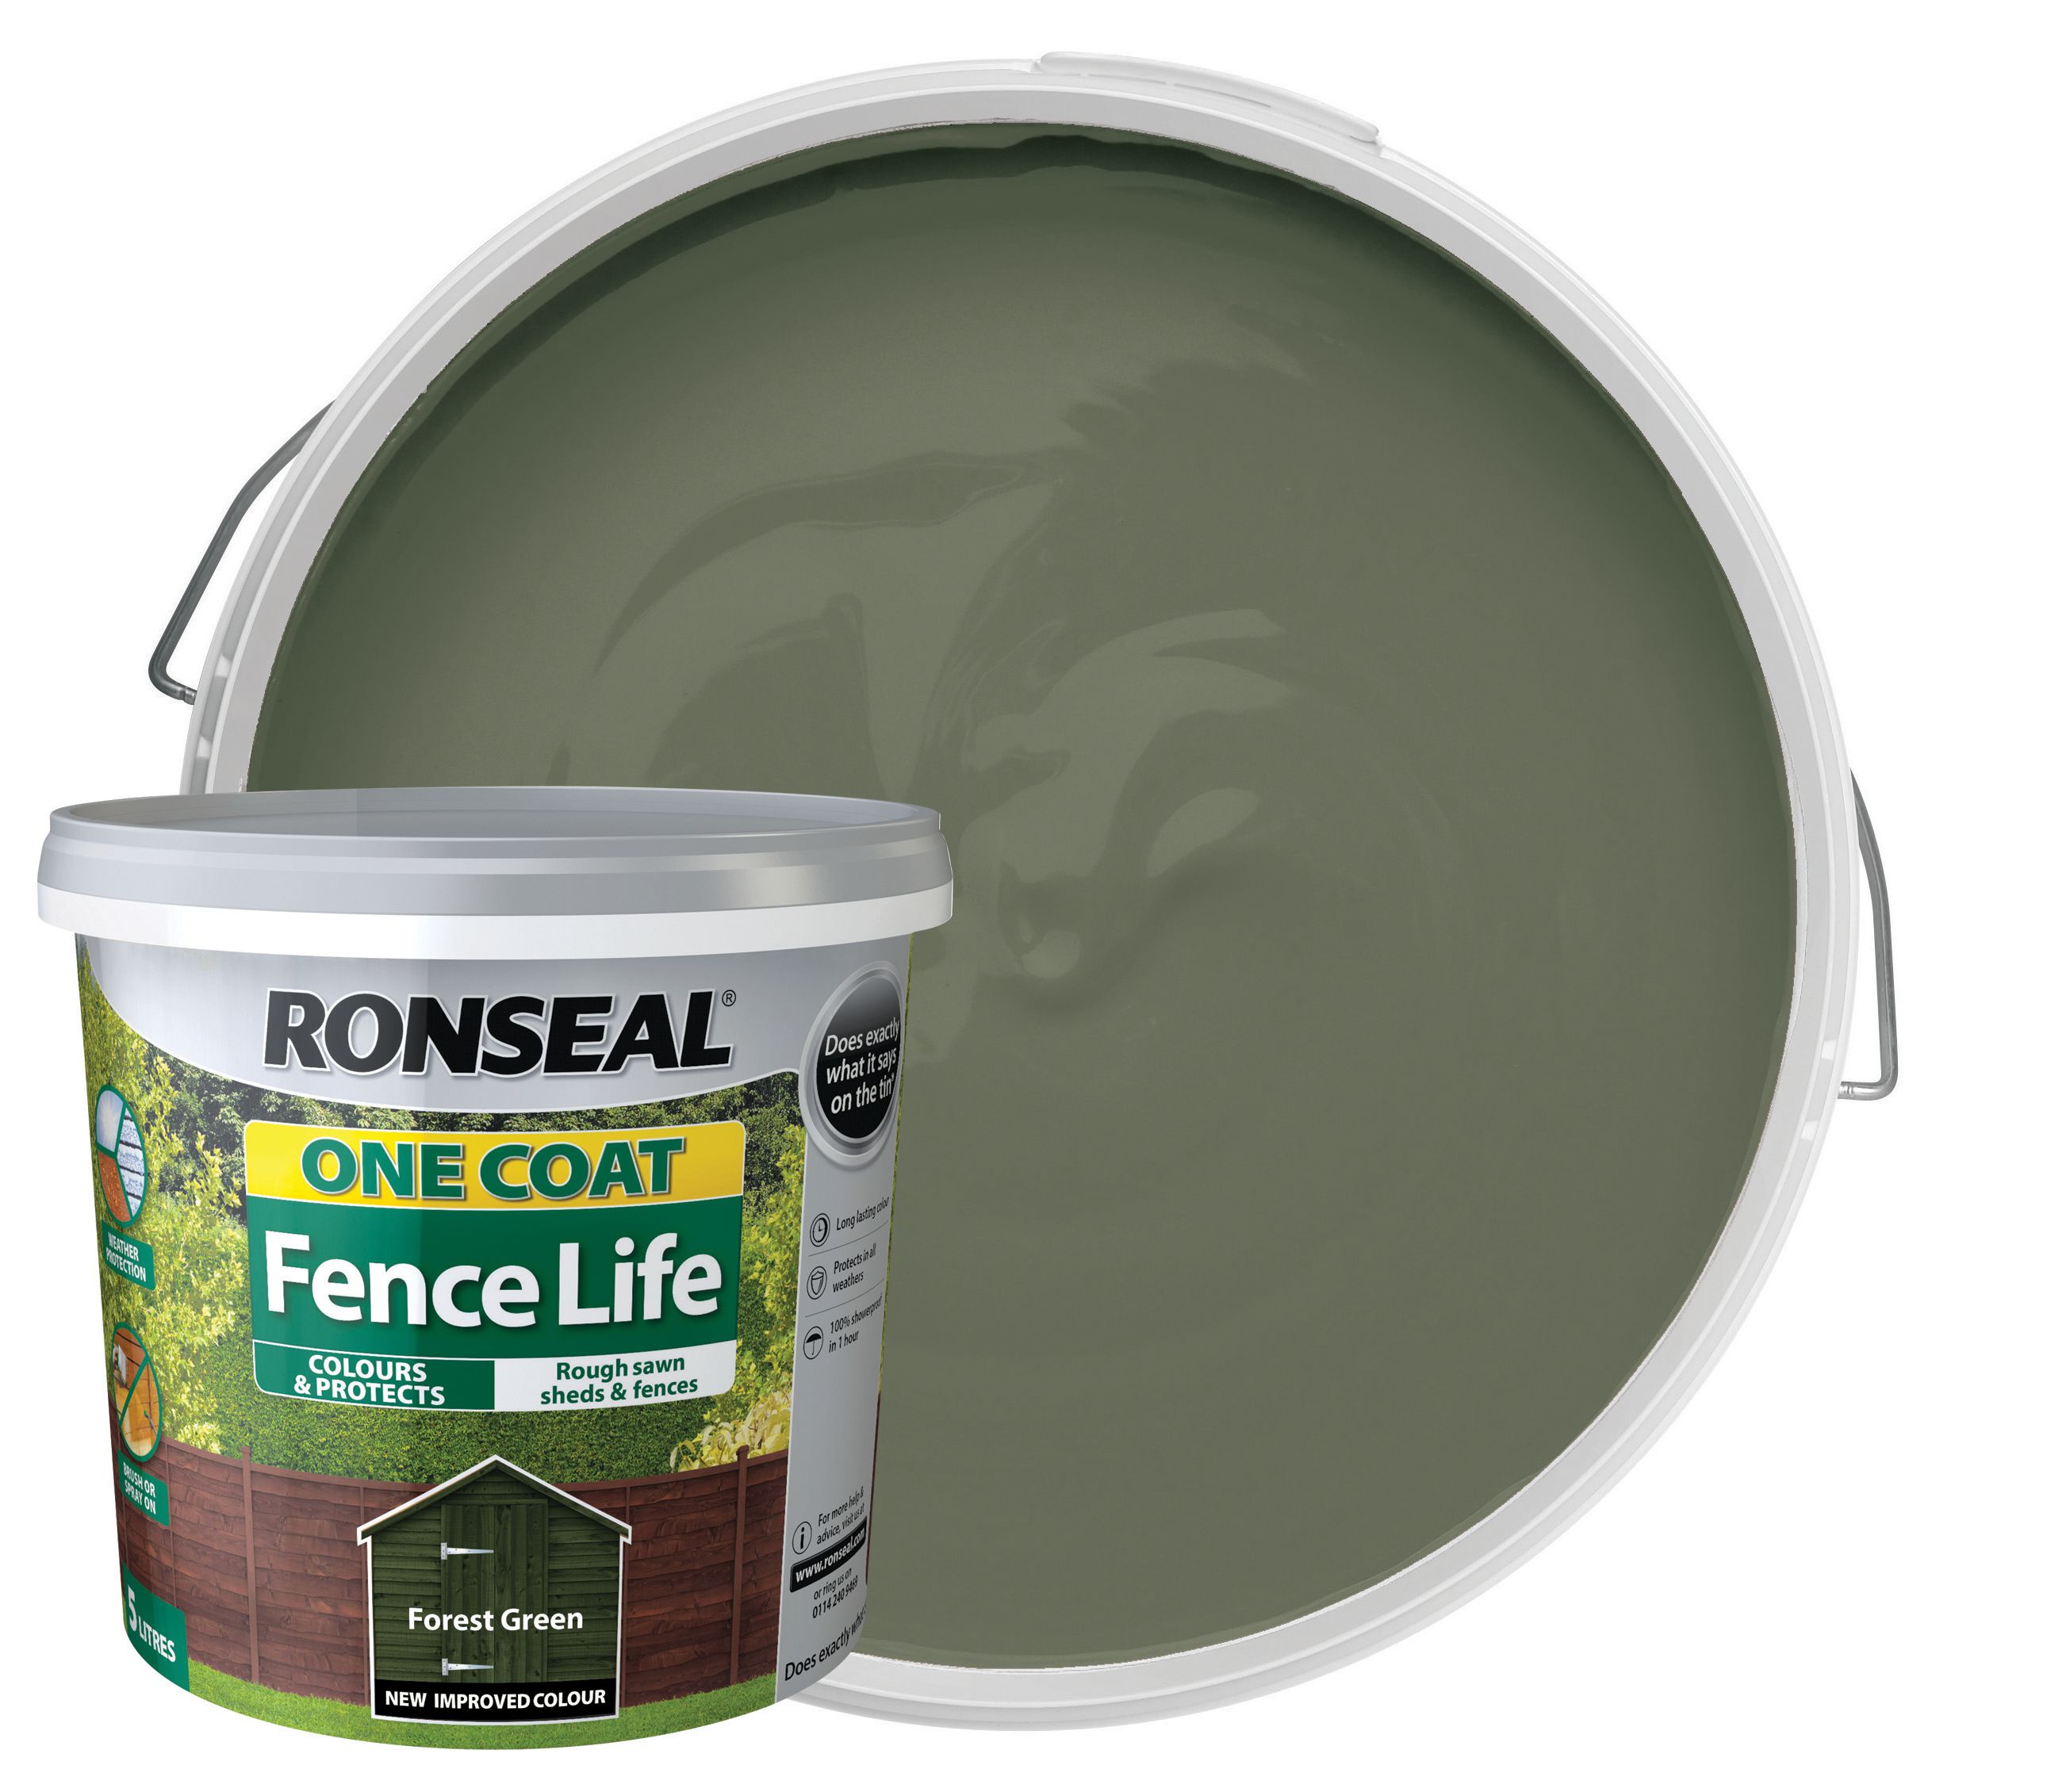 Ronseal One Coat Fence Life Matt Shed & Fence Treatment - Forest Green - 5L